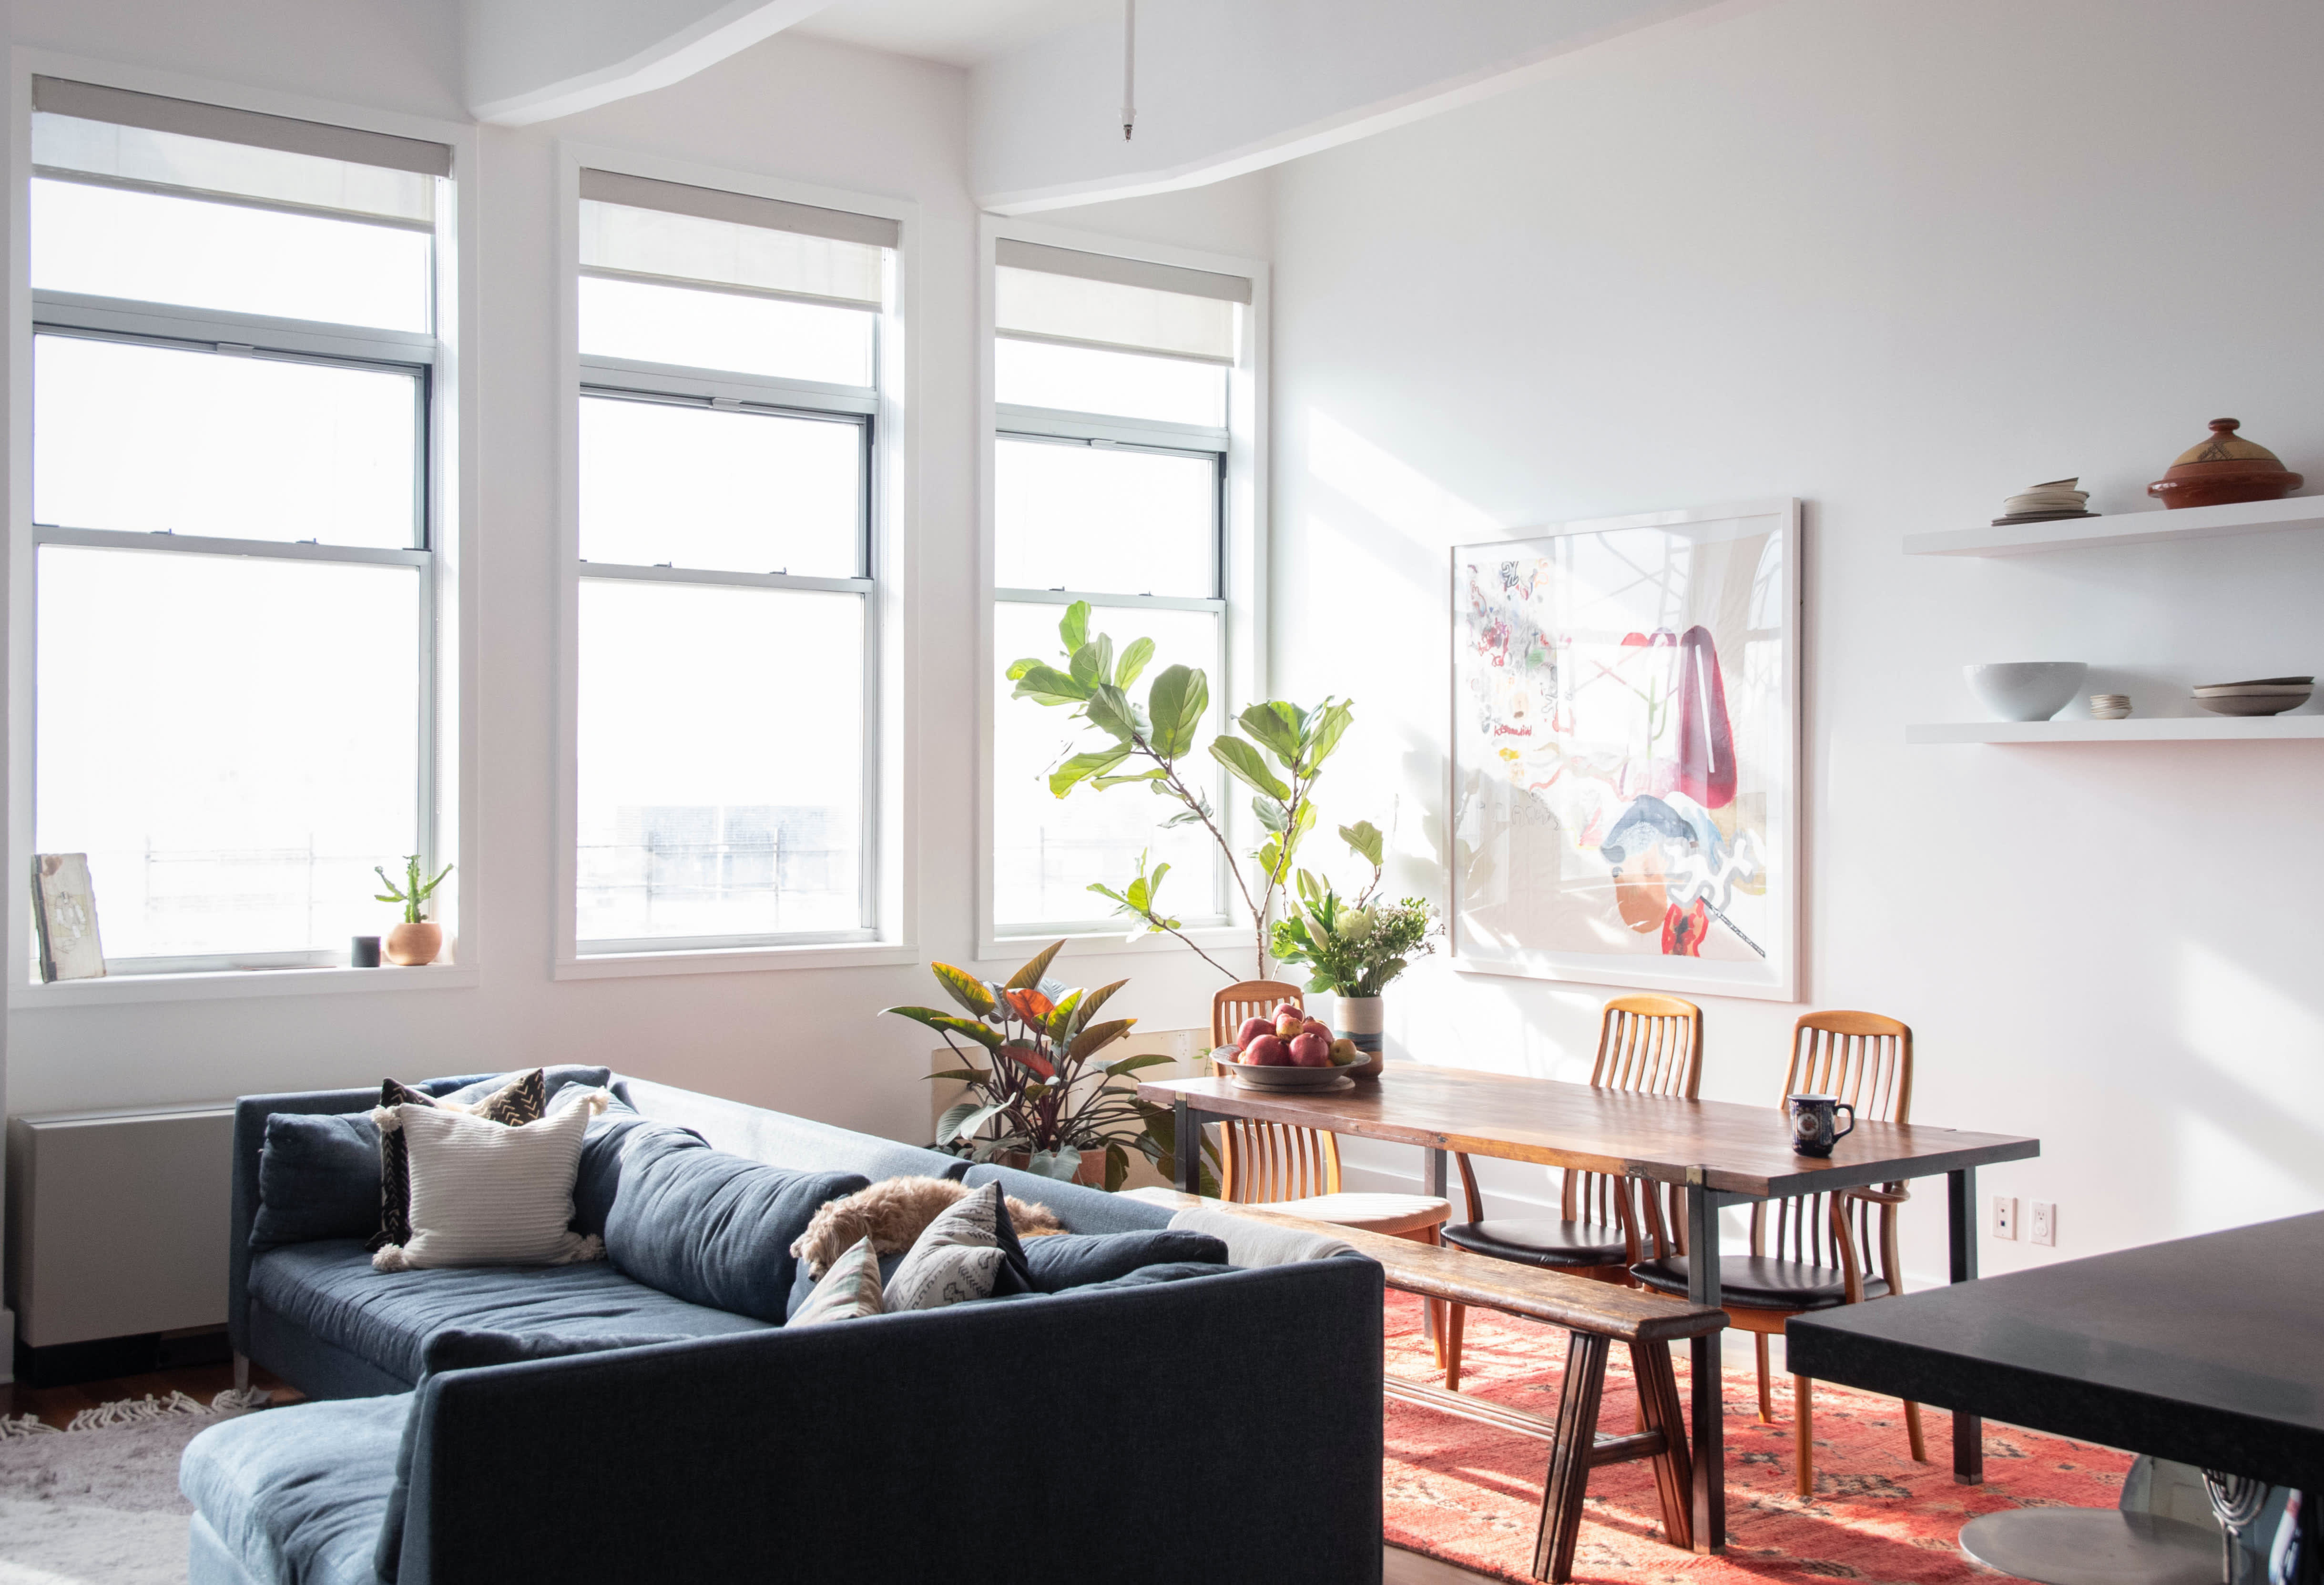 Chef Eden Grinshpan Brooklyn Home Photos | Apartment Therapy